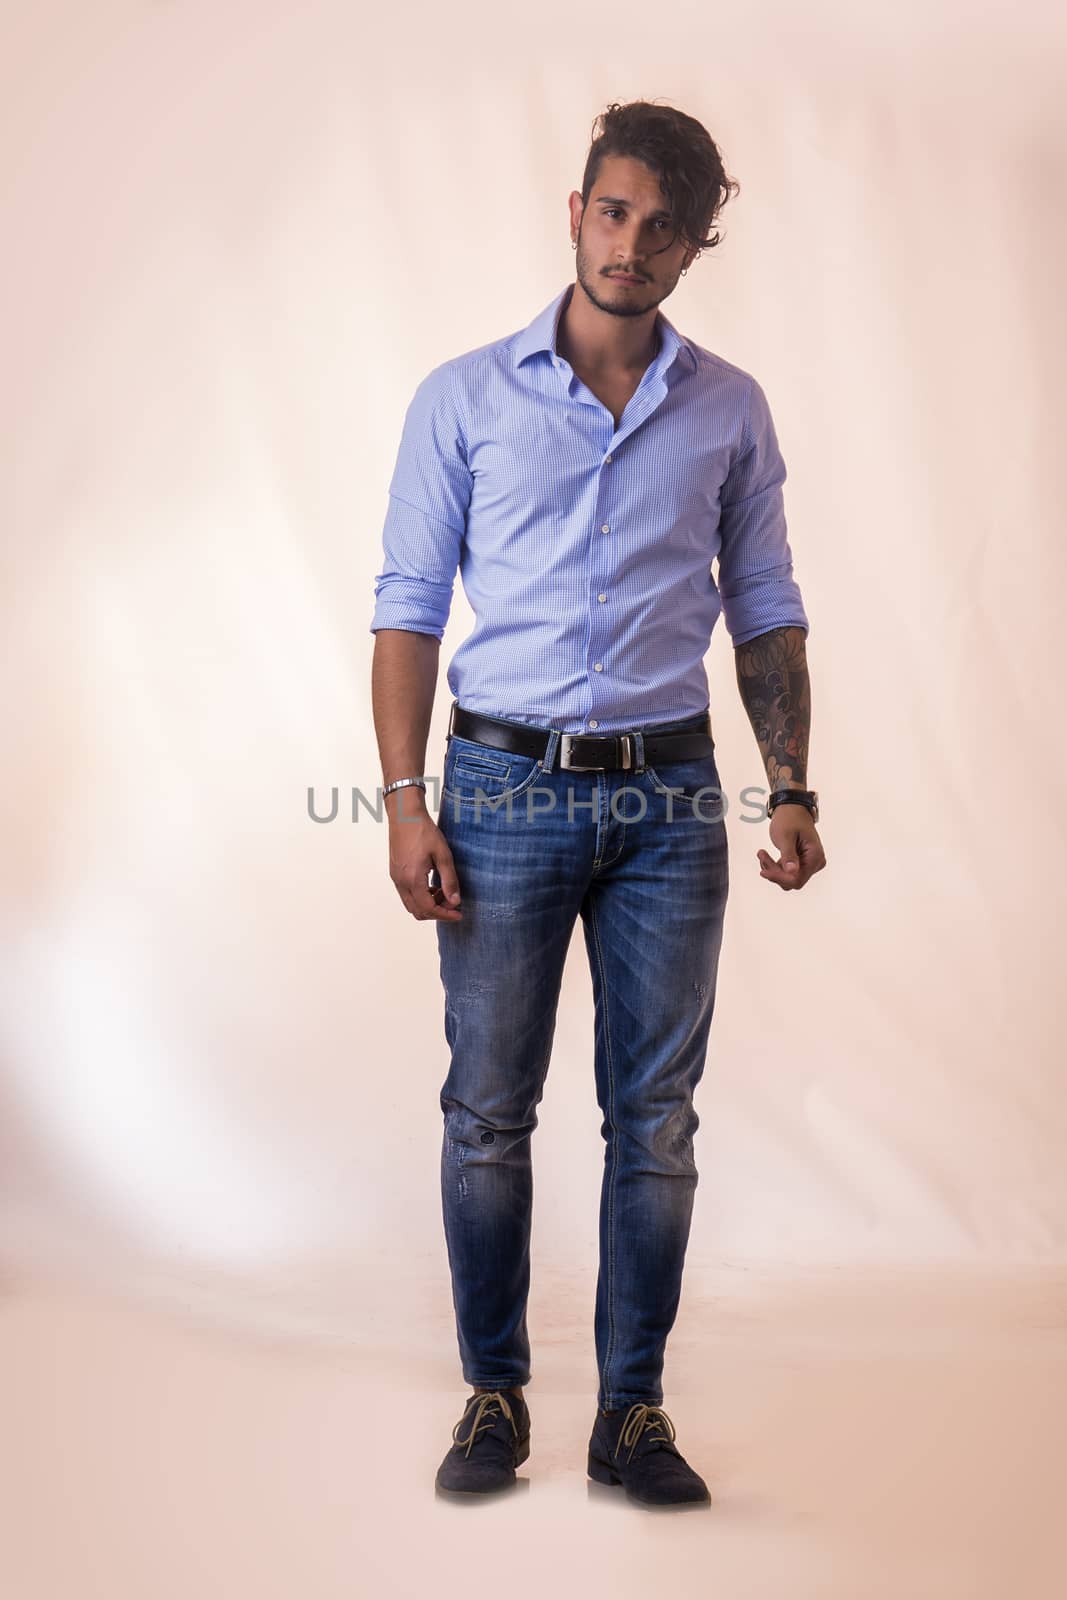 Portrait of brunette young man in light blue shirt and jeans, standing in studio shot against light background. Full length photo